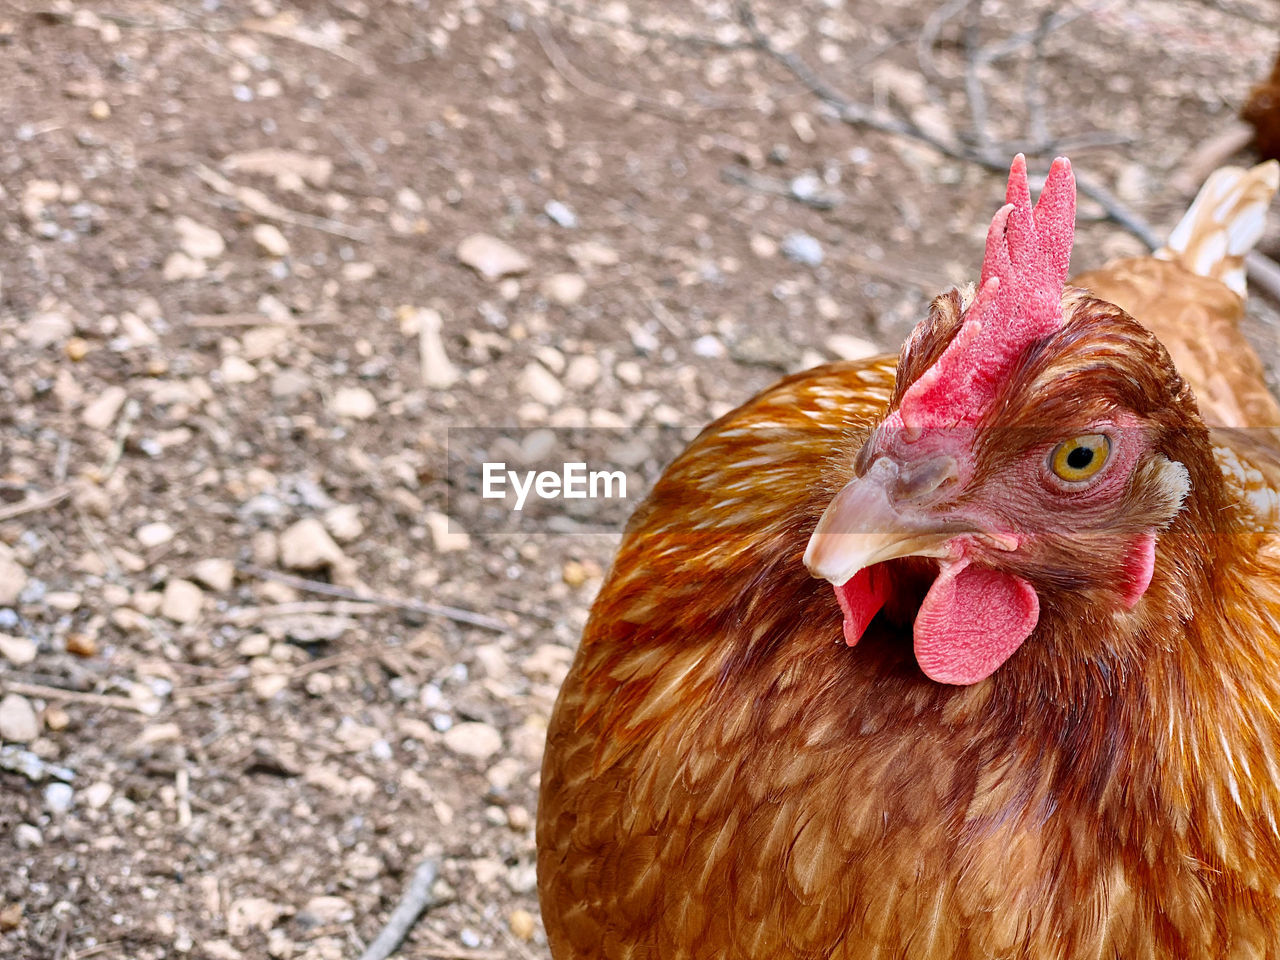 domestic animals, chicken, livestock, animal themes, animal, pet, bird, mammal, rooster, agriculture, one animal, beak, comb, poultry, hen, farm, nature, no people, cockerel, close-up, focus on foreground, day, animal body part, fowl, outdoors, rural scene, animal head